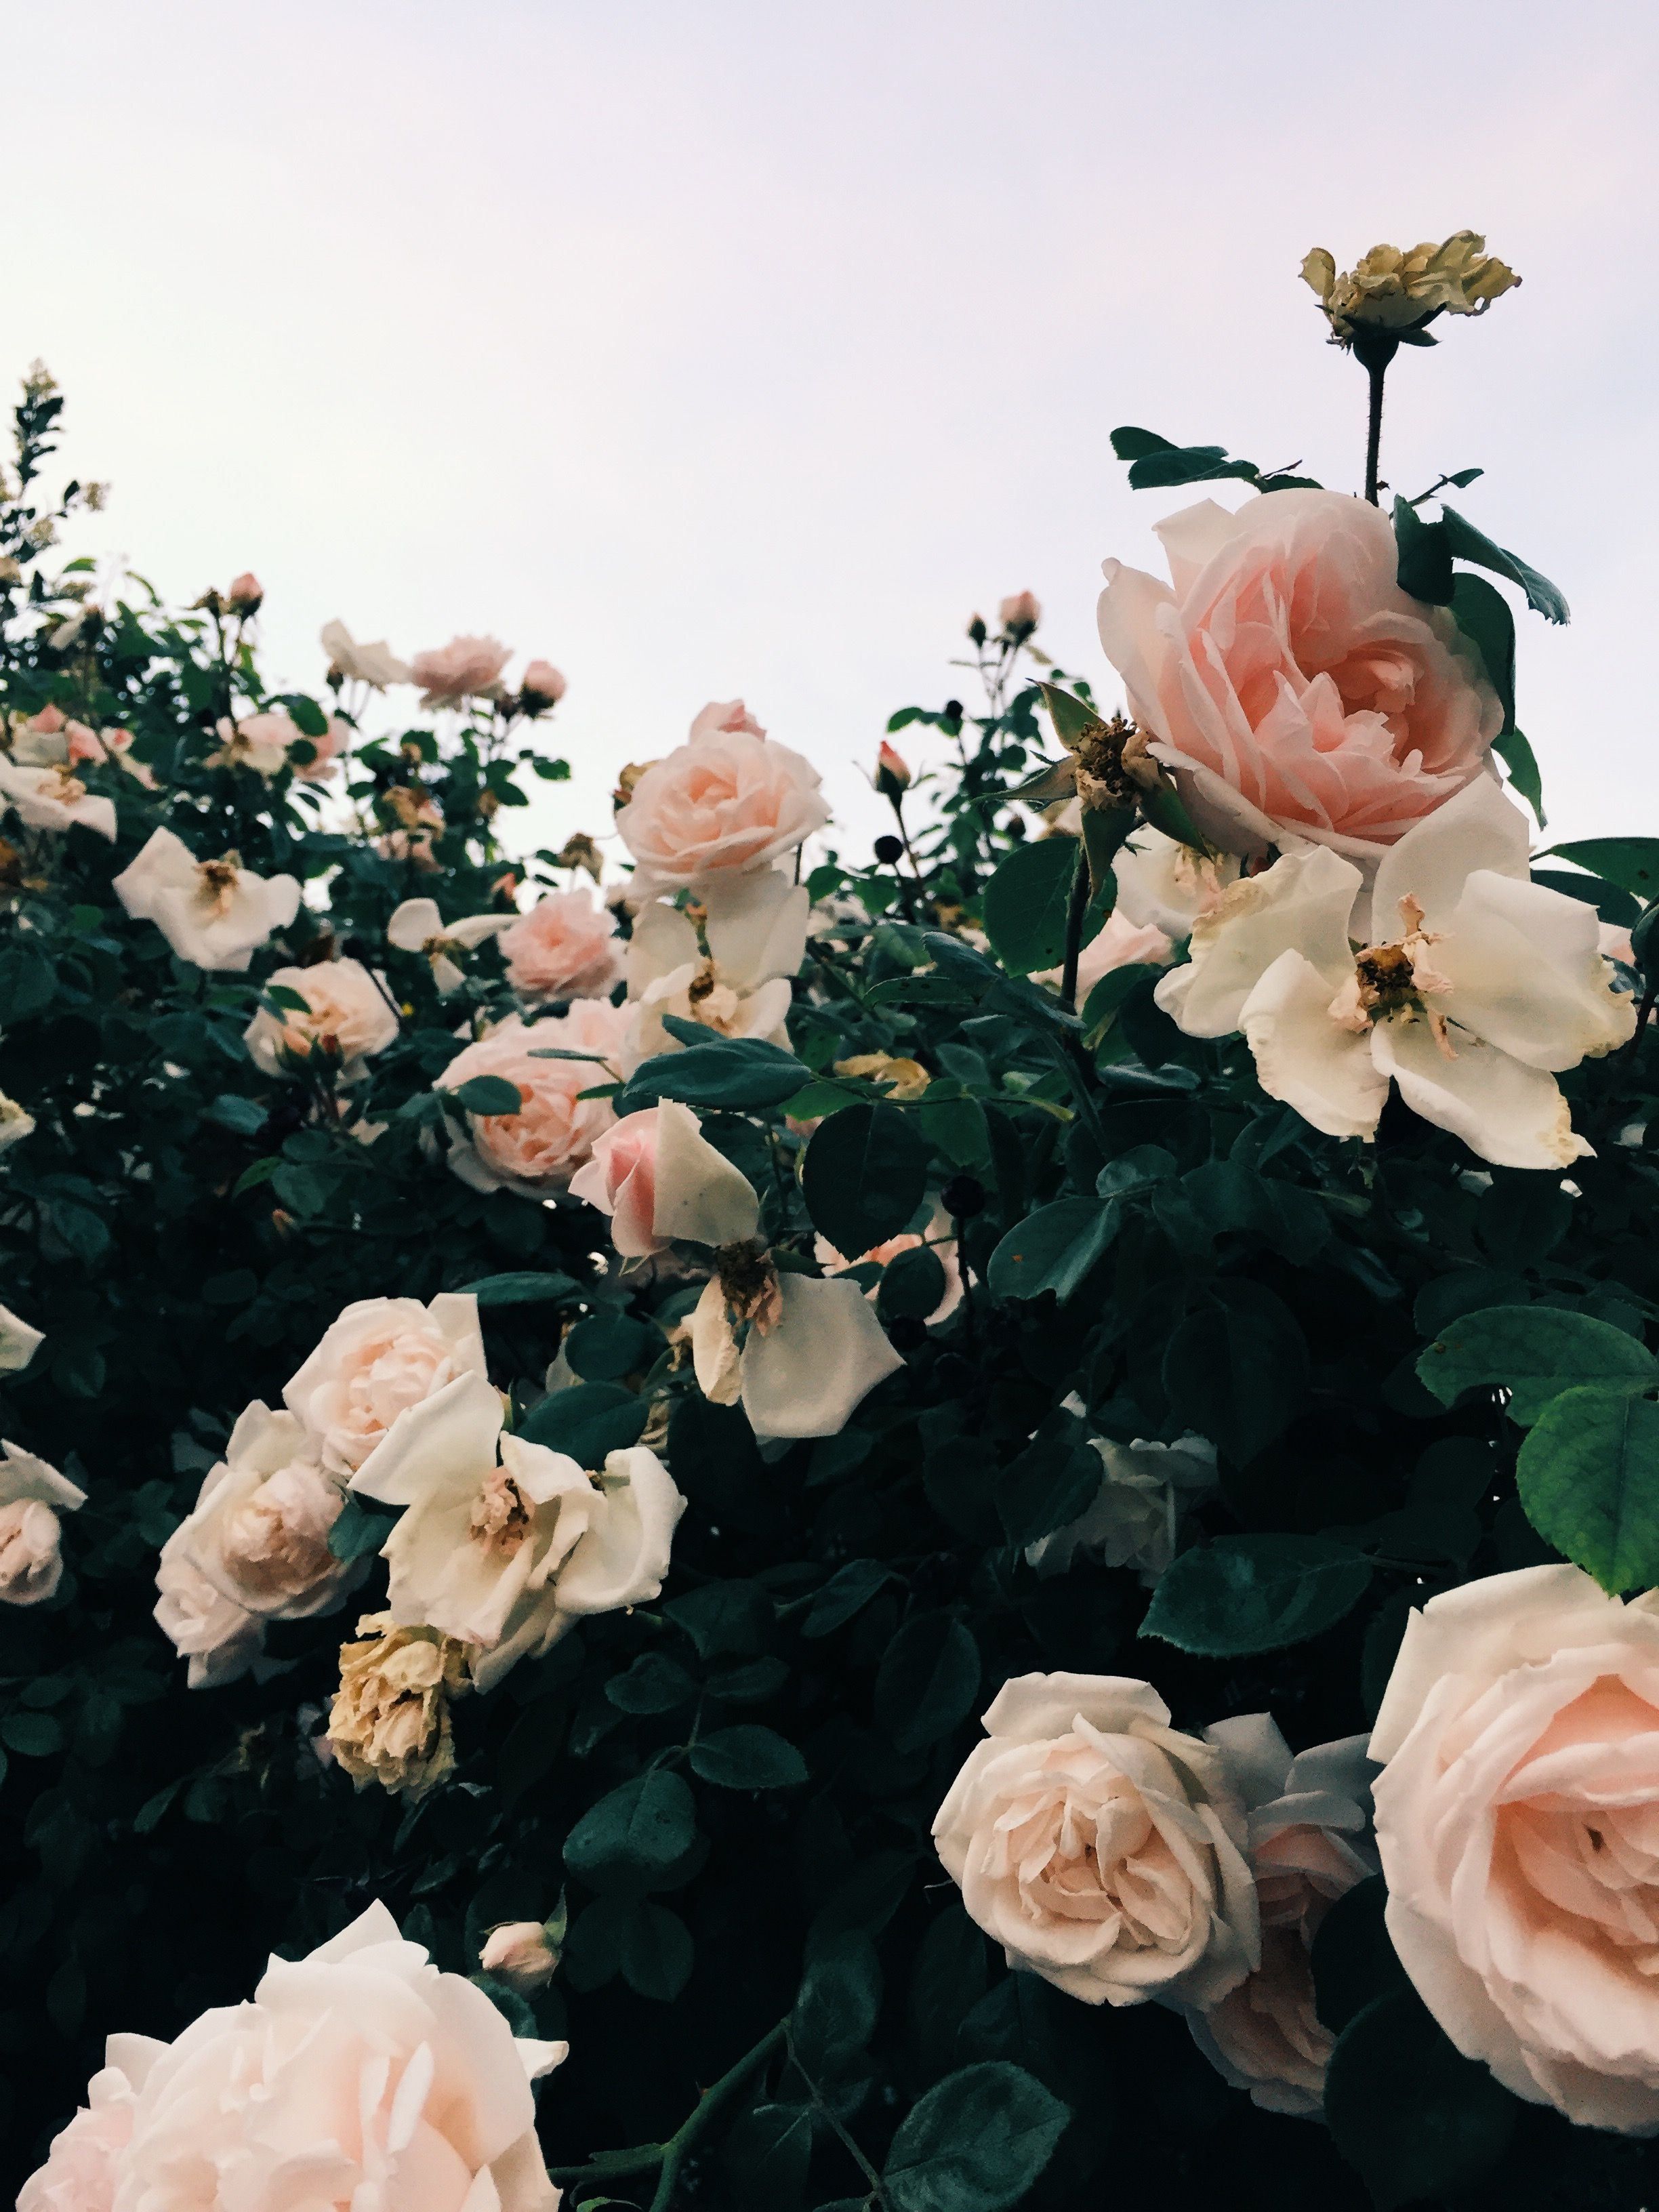  Rosa Rosen Hintergrundbild 2448x3264. follow me on Insta // pink roses, garden roses, wild roses, pink roses aesthetic, pink roses ae. Photo wall collage, Picture collage wall, Pink roses